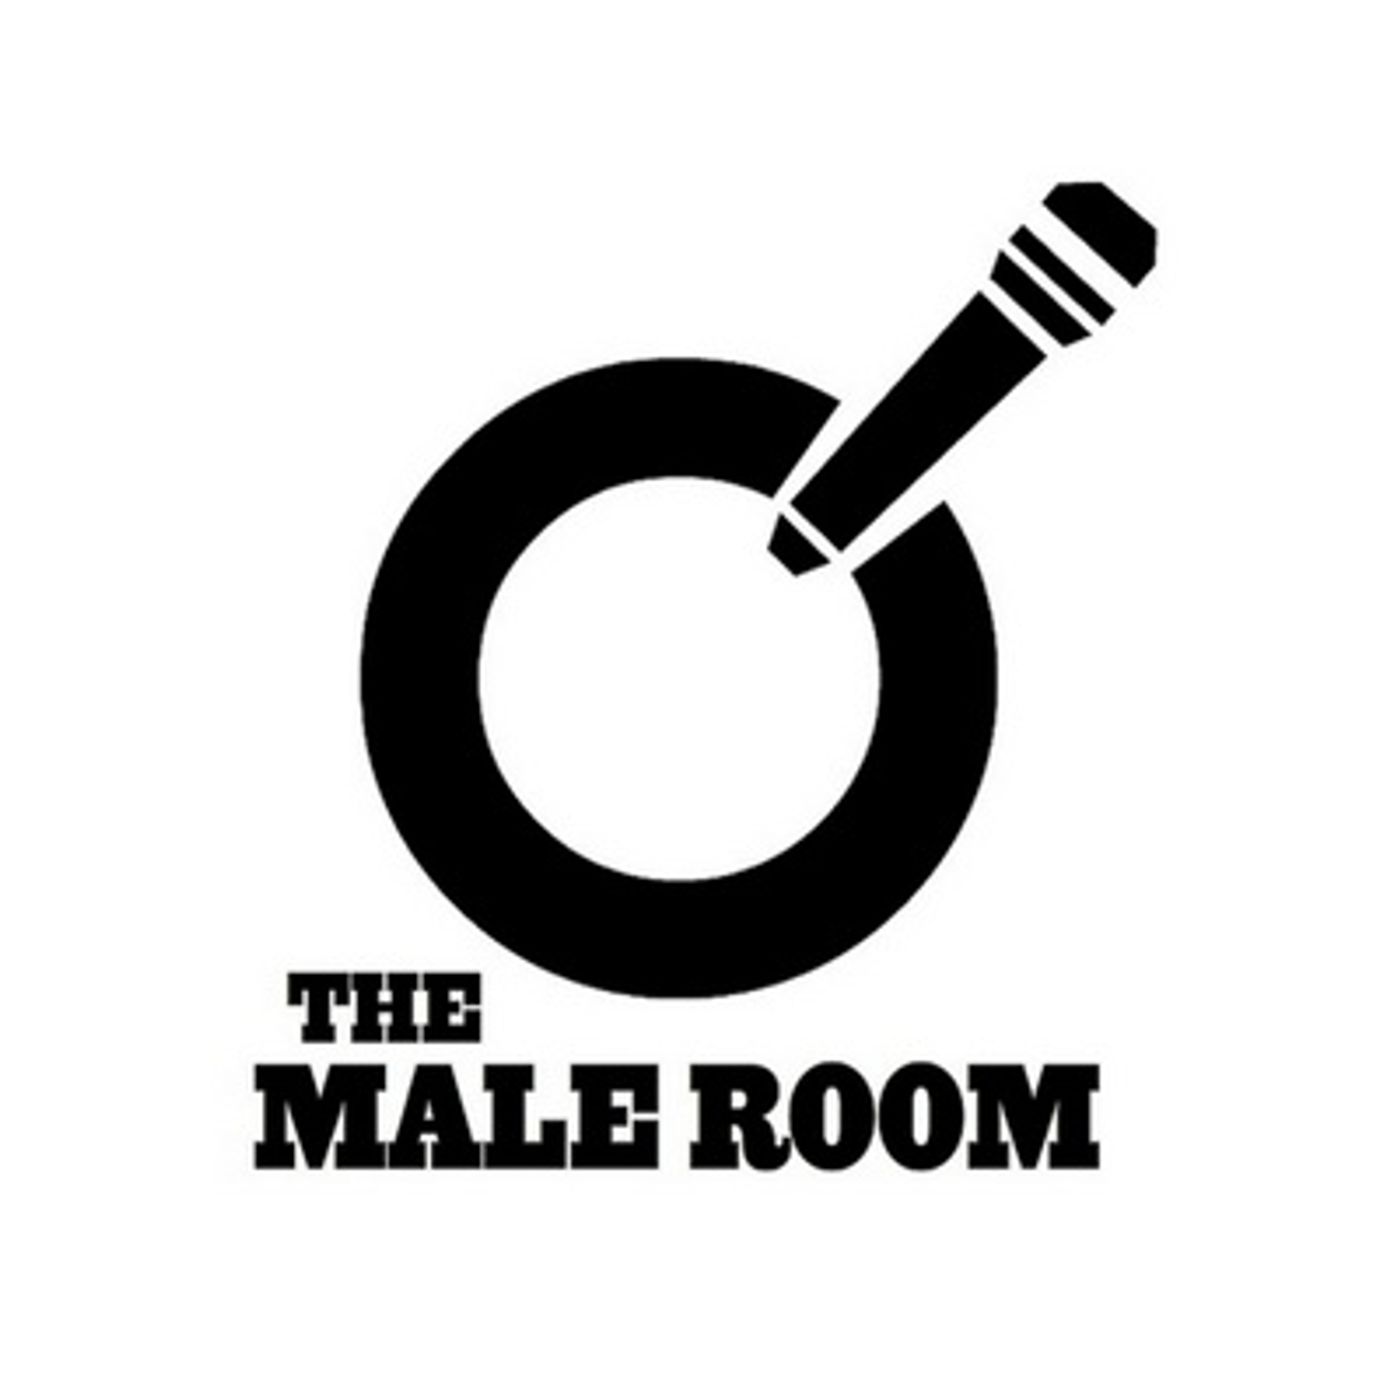 Rescued from drowning - an extraordinary story - The Male Room Episode 8 Image